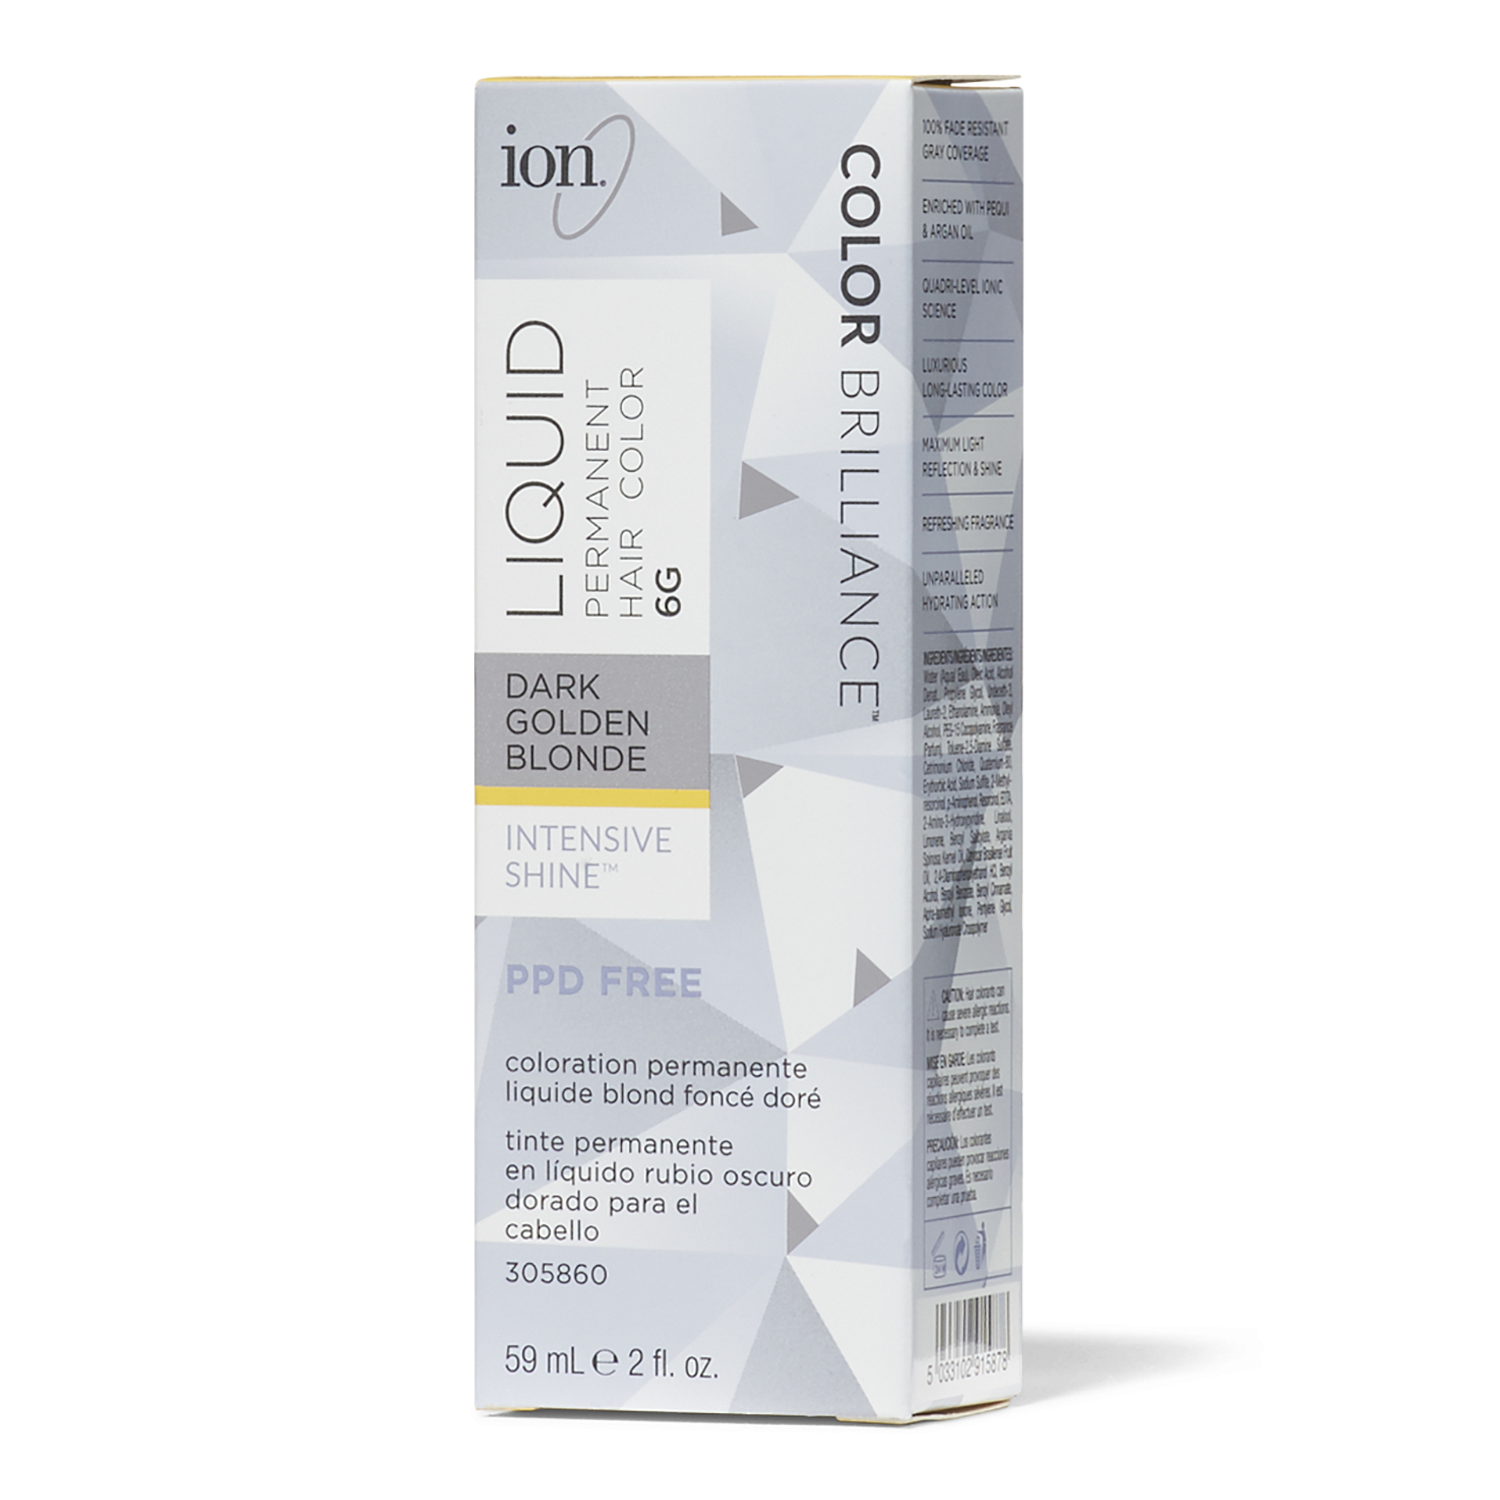 Ion 6g Dark Golden Blonde Permanent Liquid Hair Color By Color